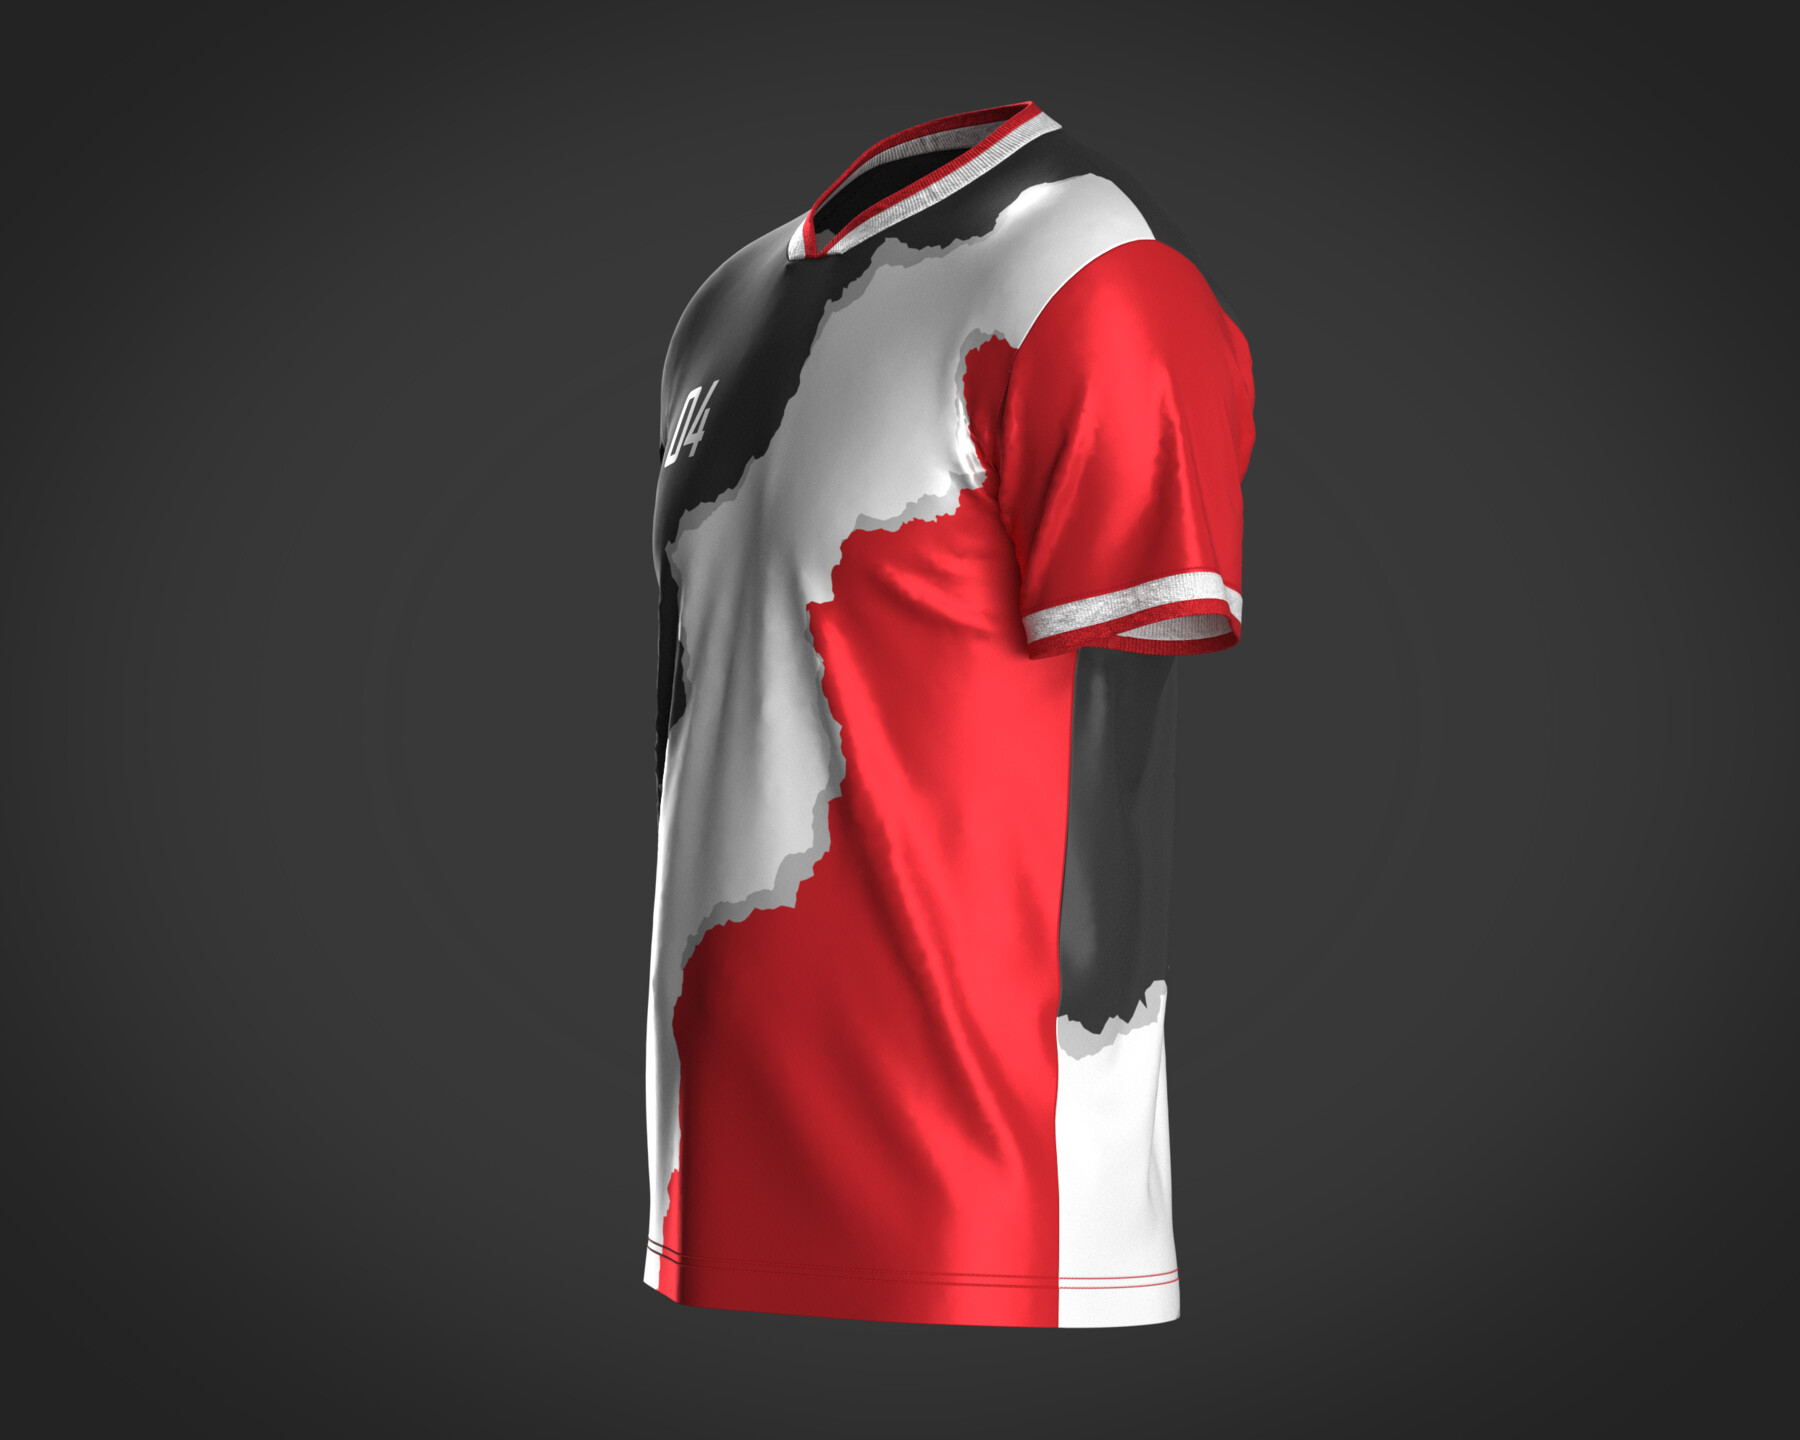 ArtStation - Soccer Football Red and Black color Jersey Player-11